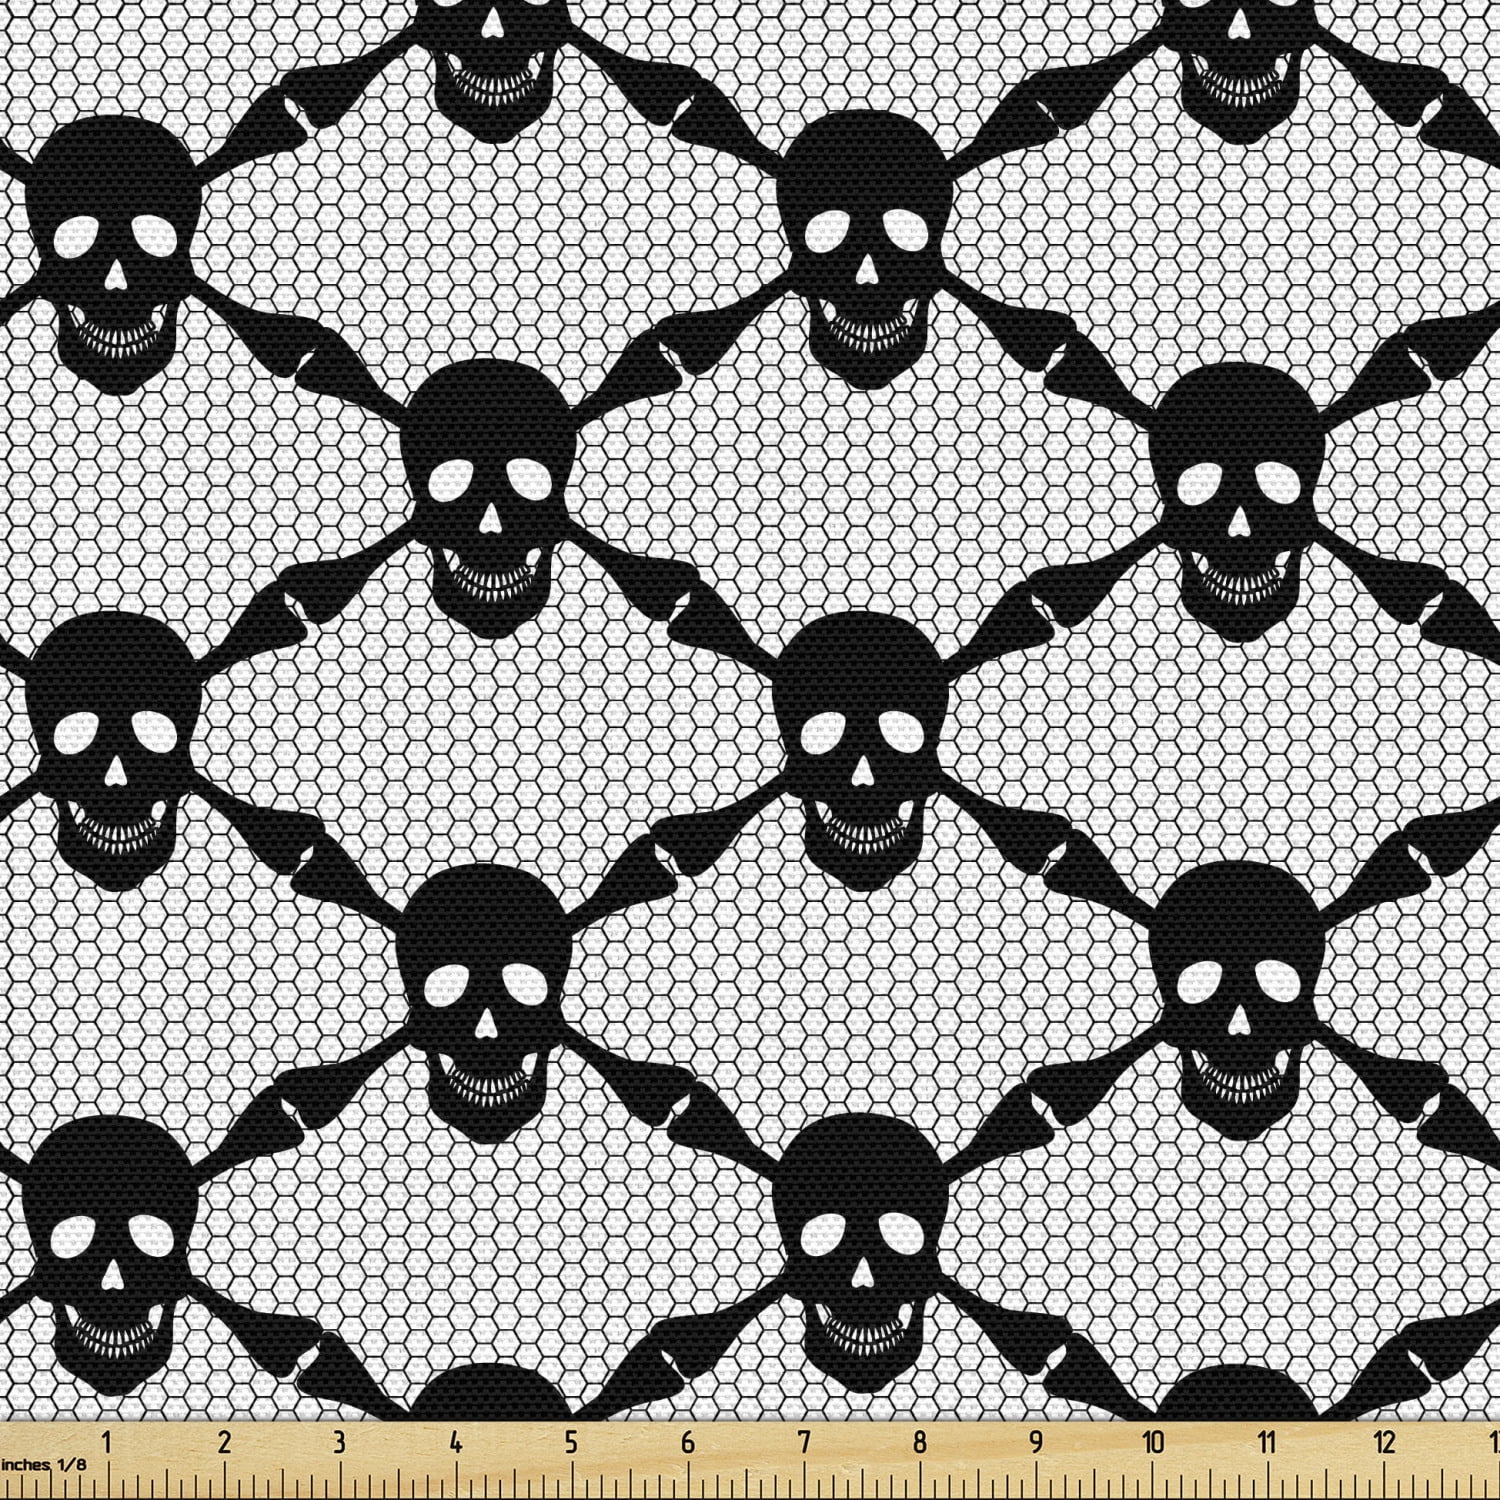 Sewing Halloween Fabric Face Mask By The Yard Pillow Fabric Mini Skulls and Bones Fat Quarter Ships Today